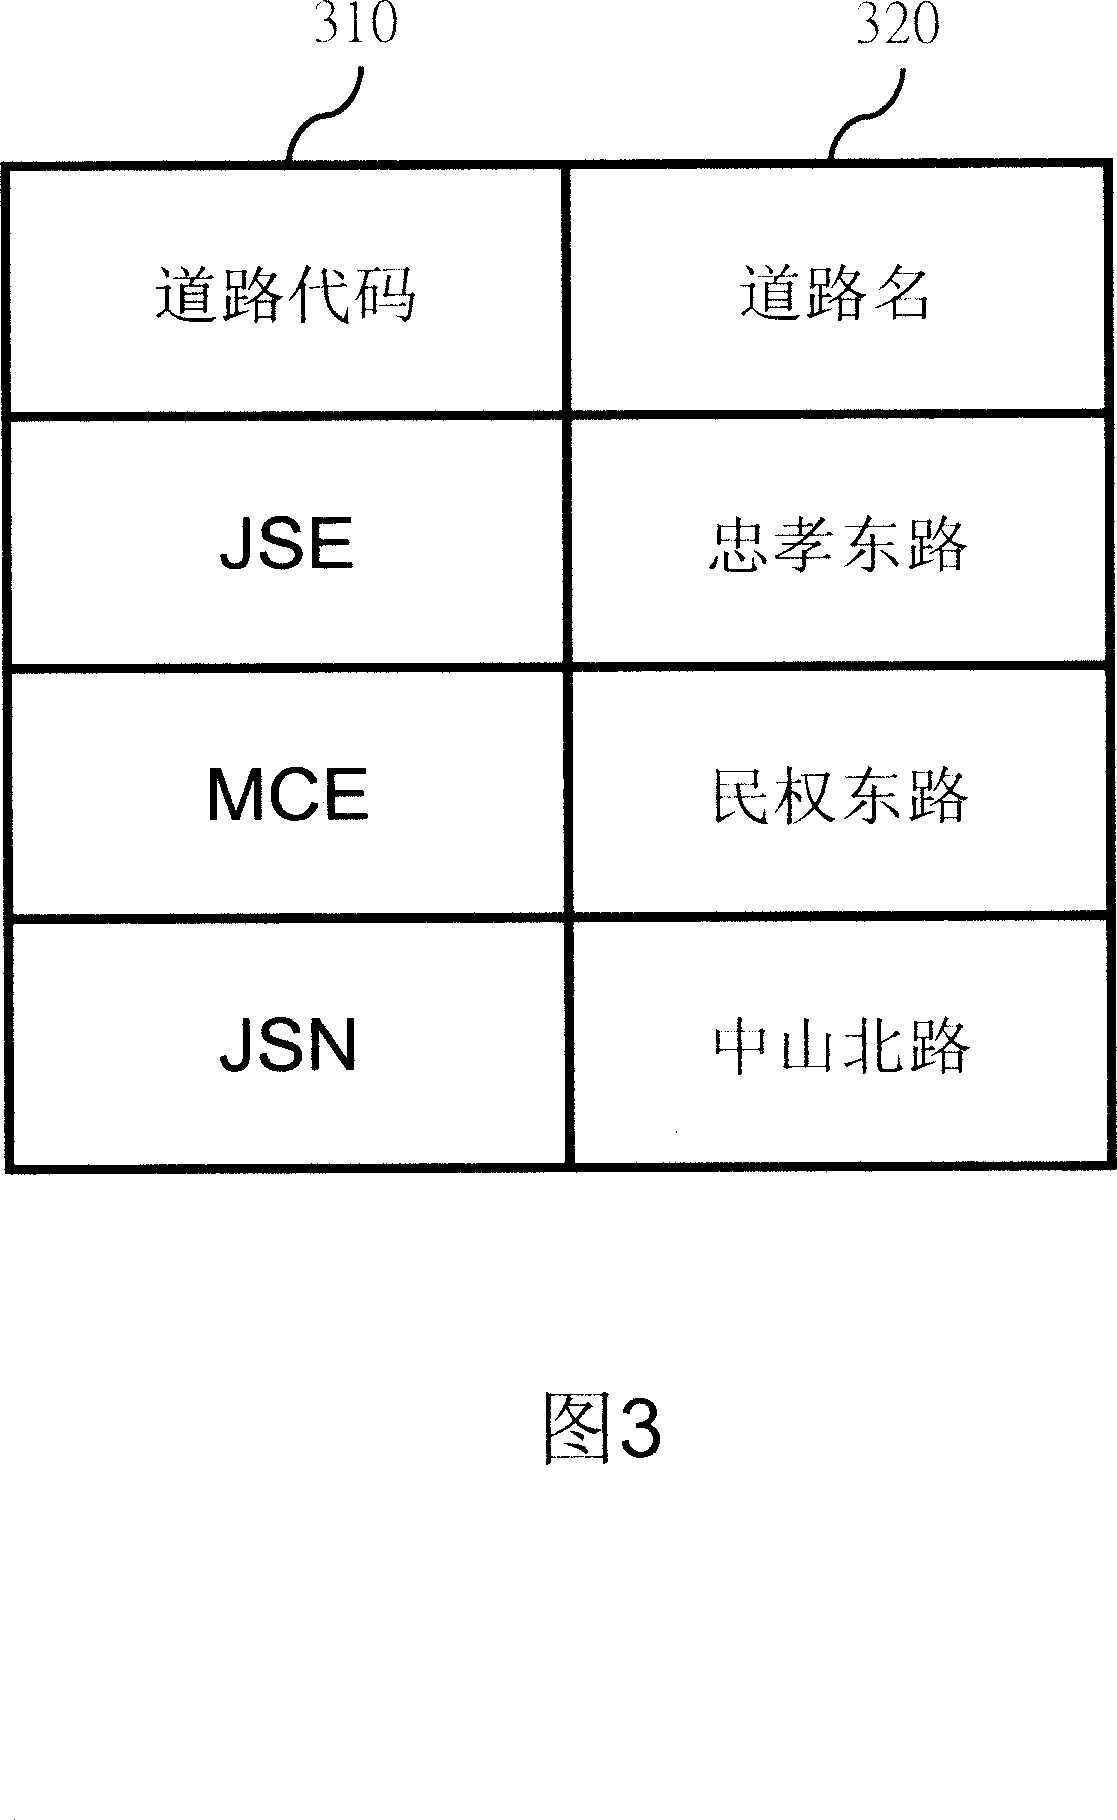 Method of transforming original address date for reducing address memory space with the code